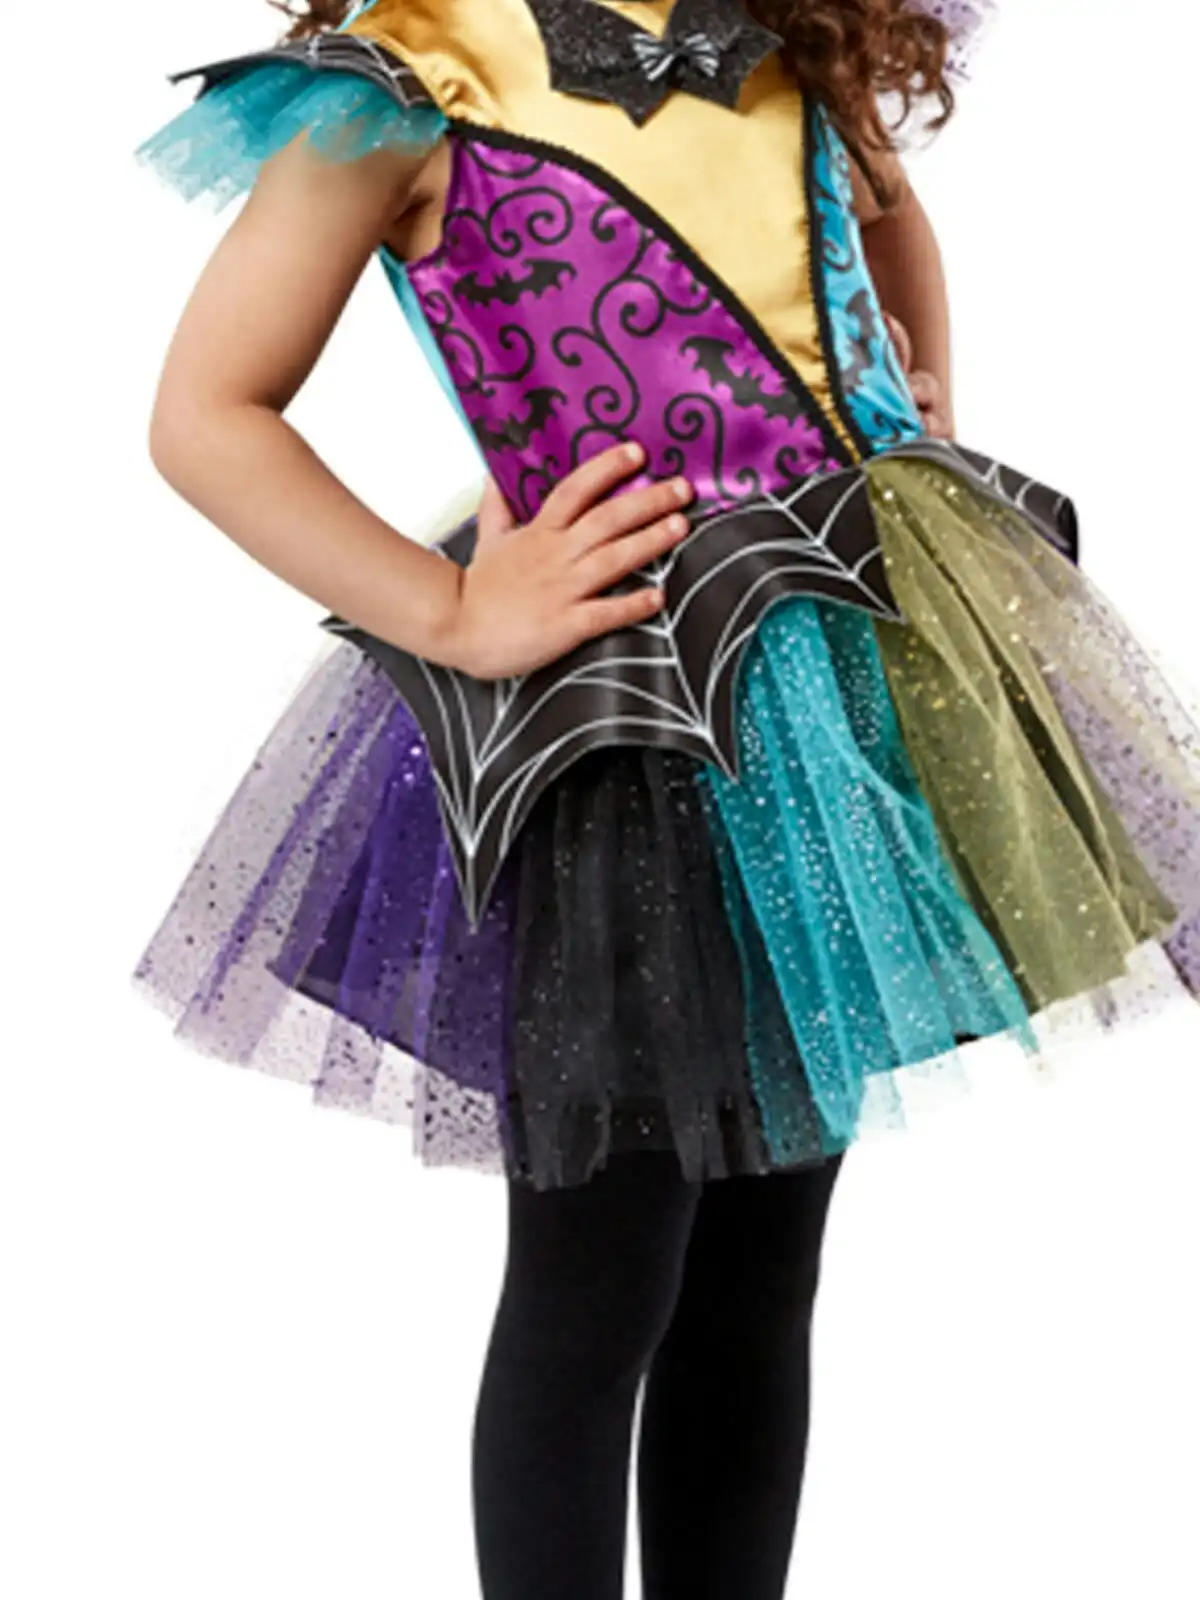 Rubies Patchwork Witch Dress Up Kids/Girls Halloween Party Costume Size 3-5